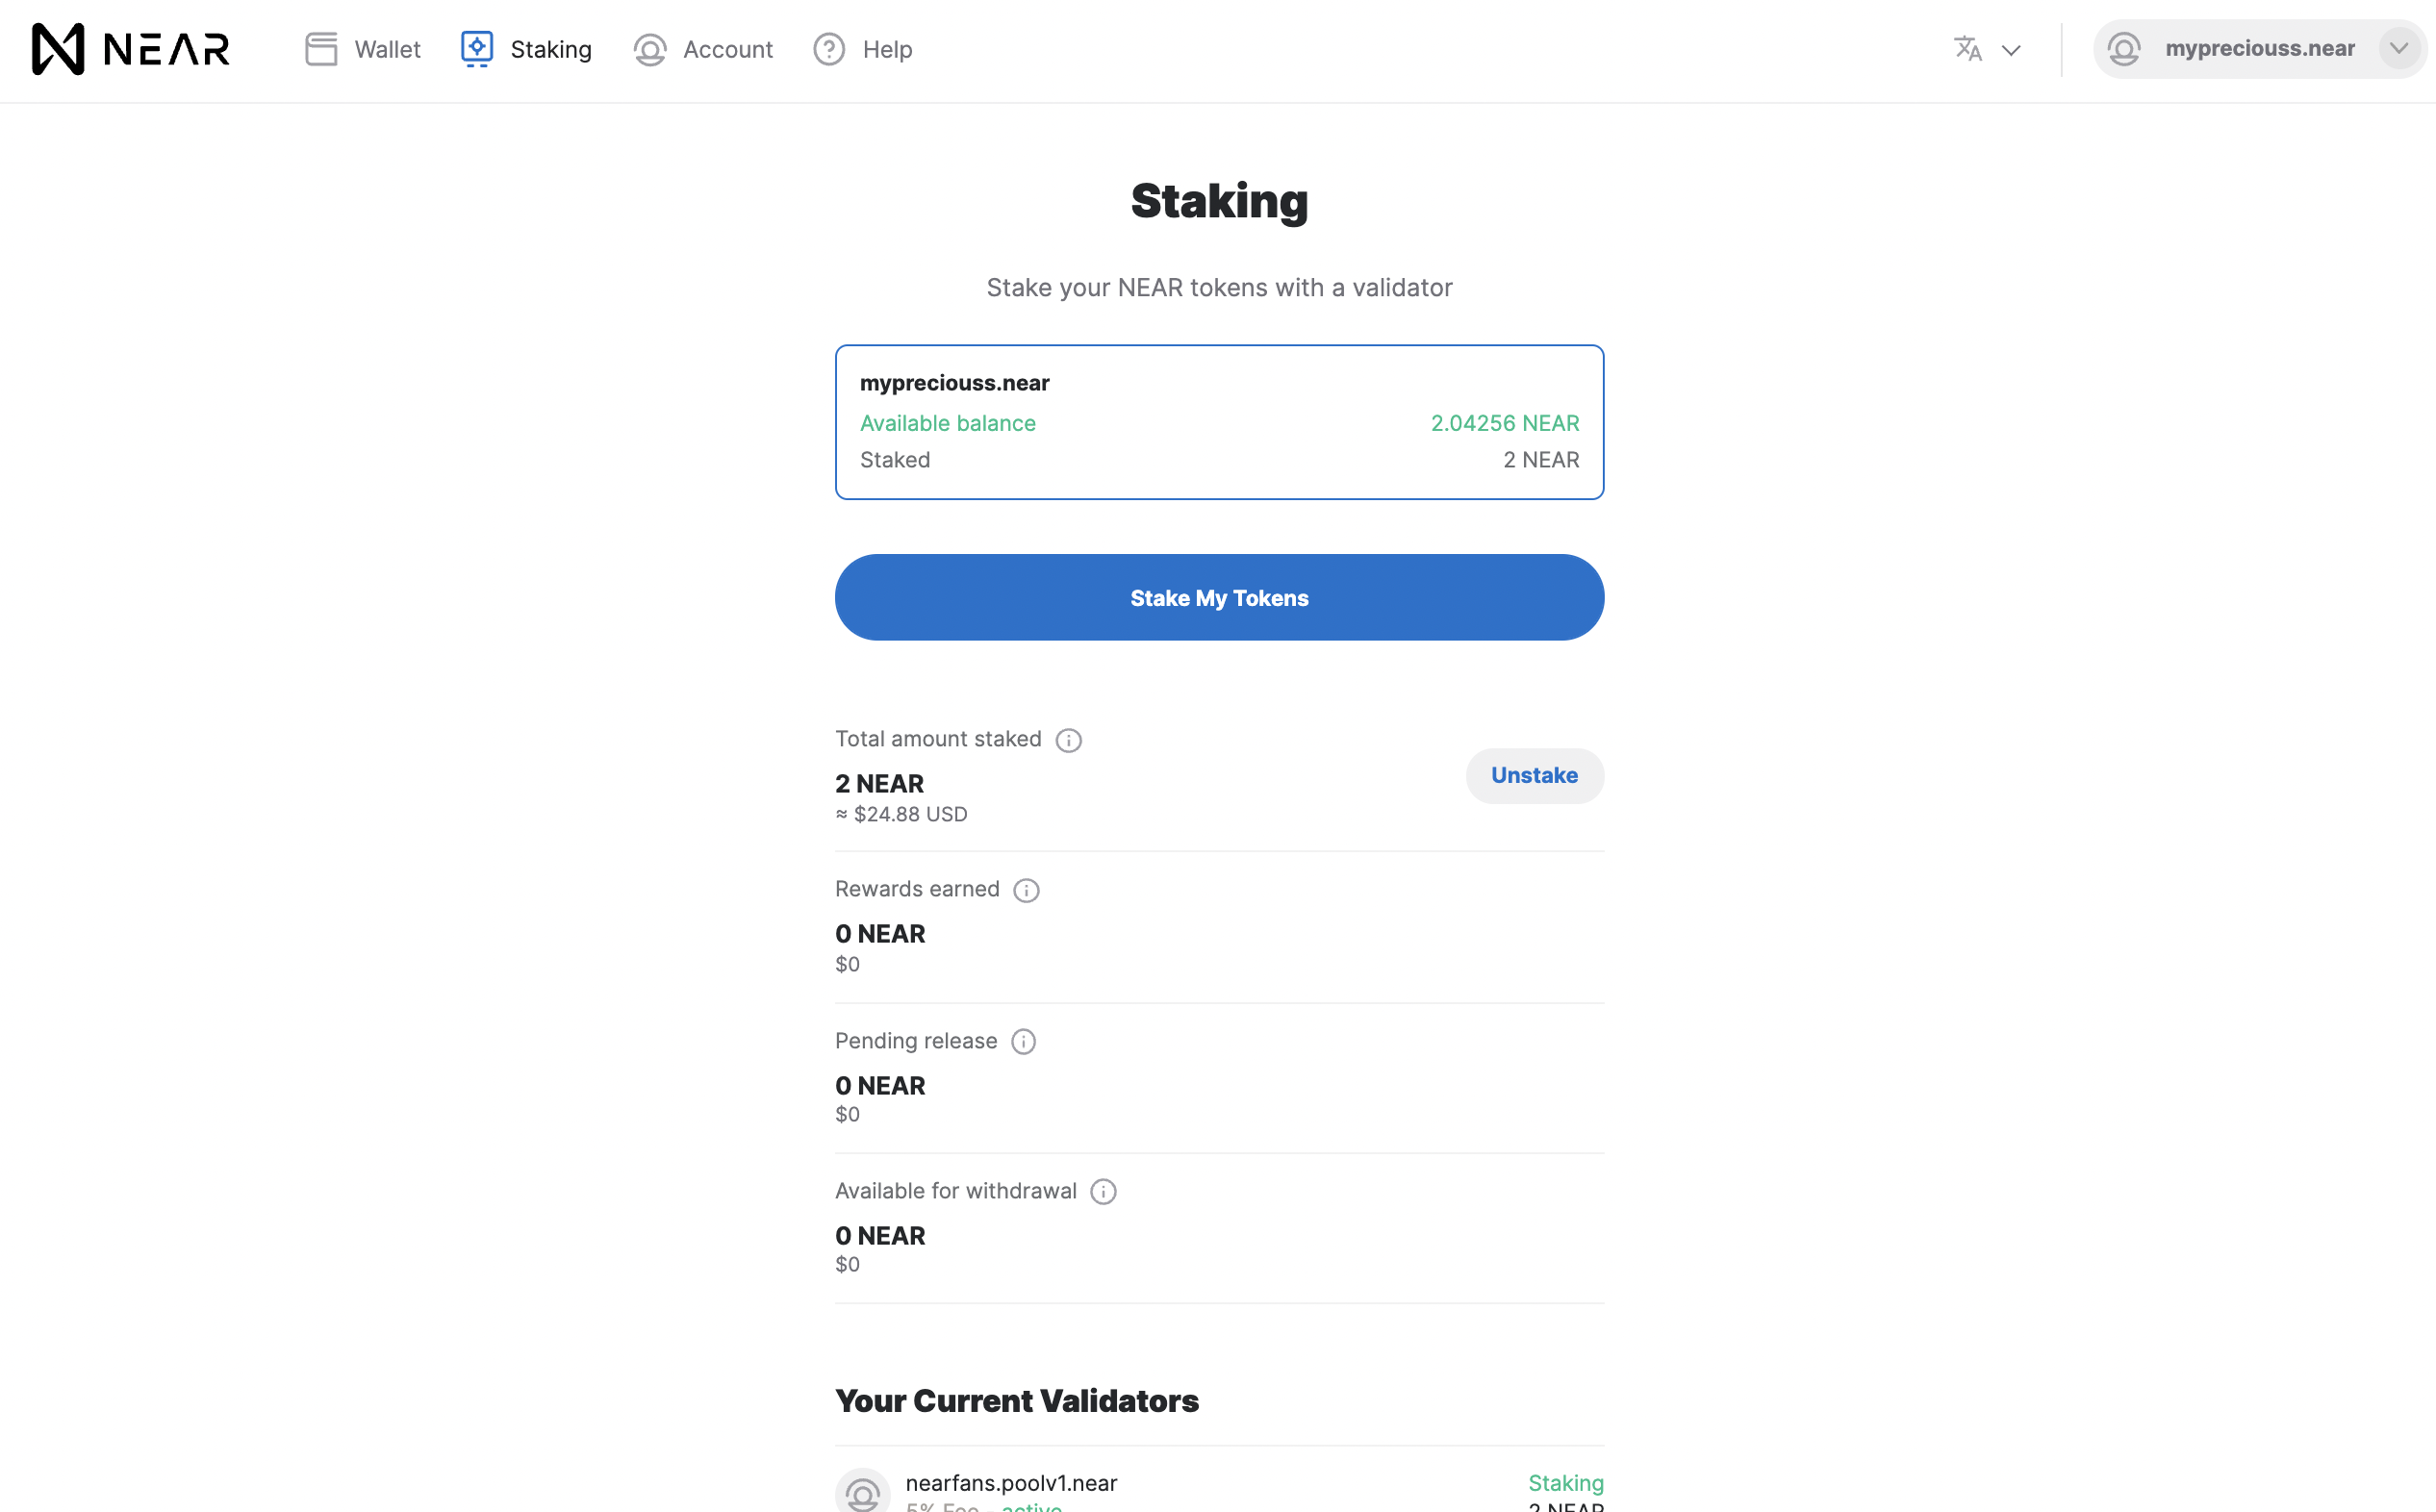 The staking dashboard